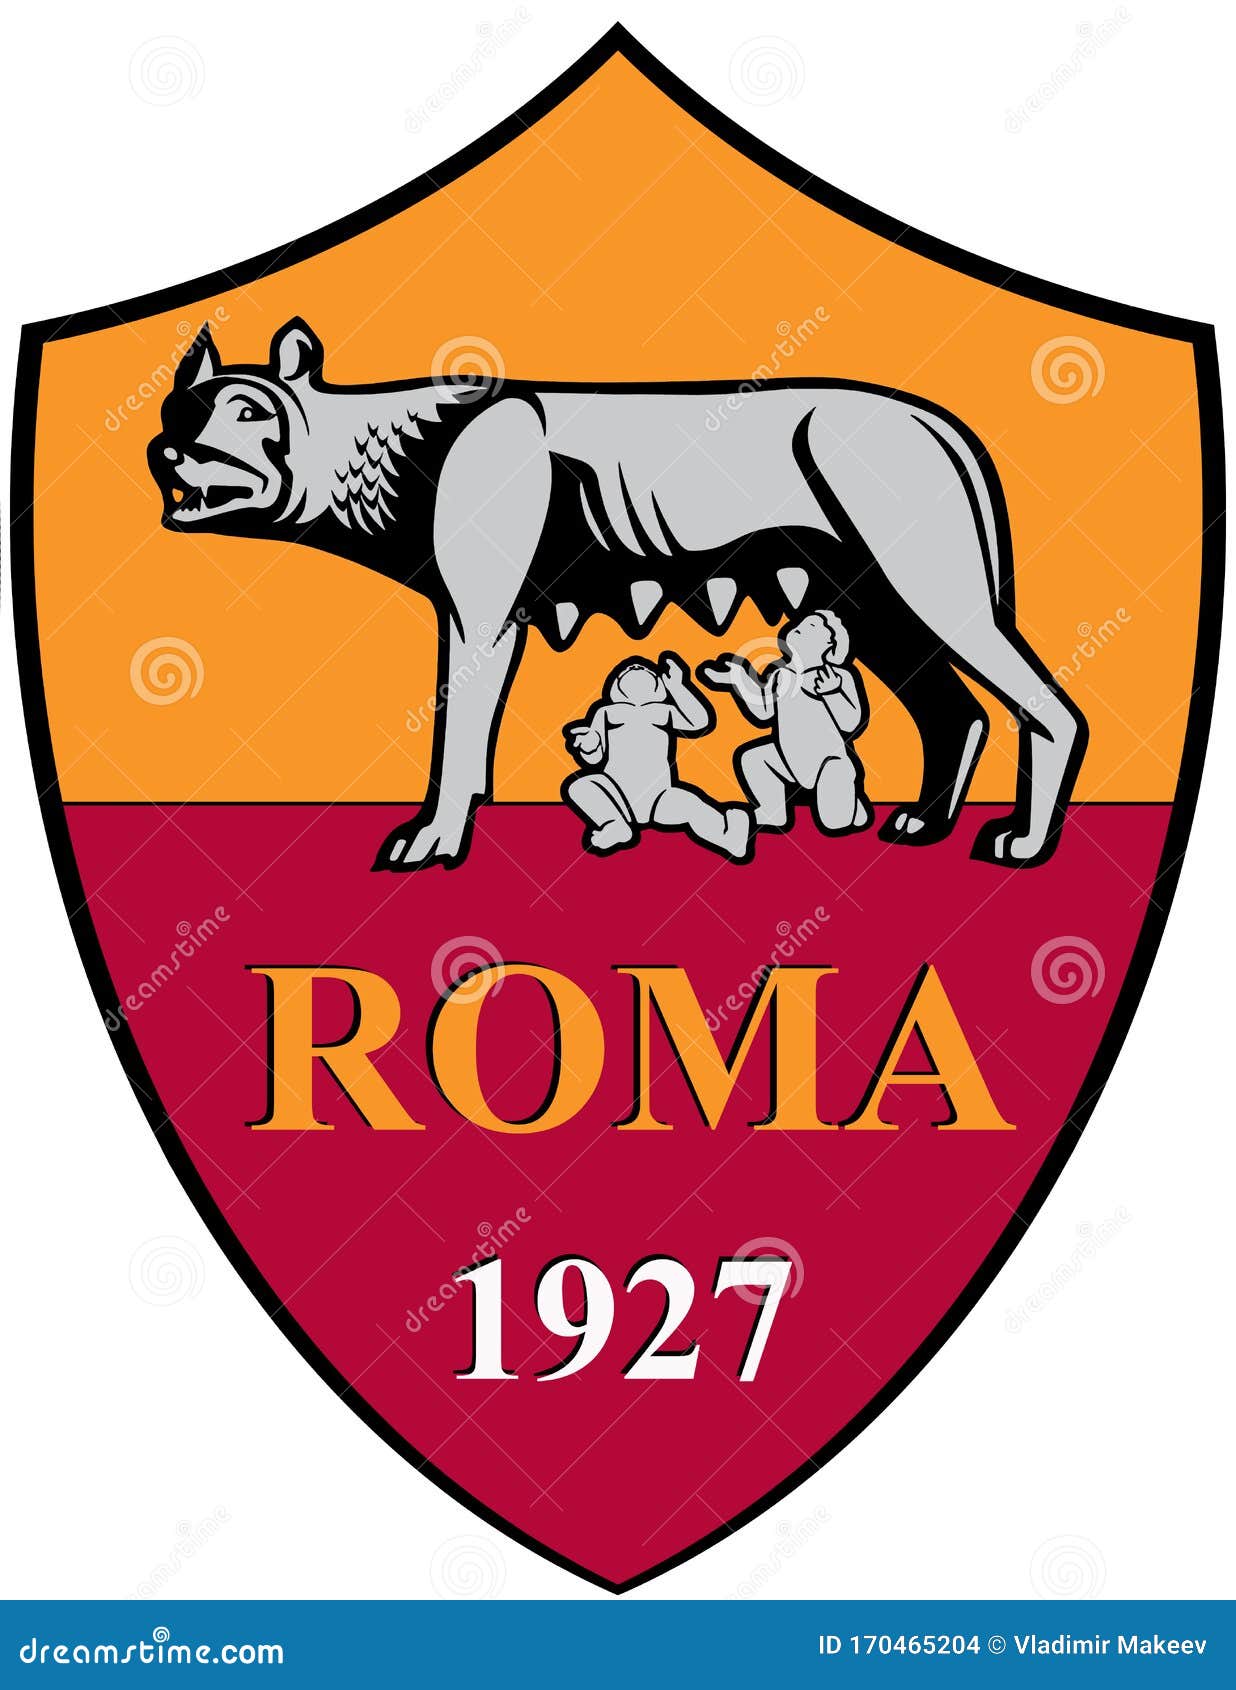 Roma Fc Fifa 21 Jersey / AS Roma Won't Be In FIFA 21 Following PES